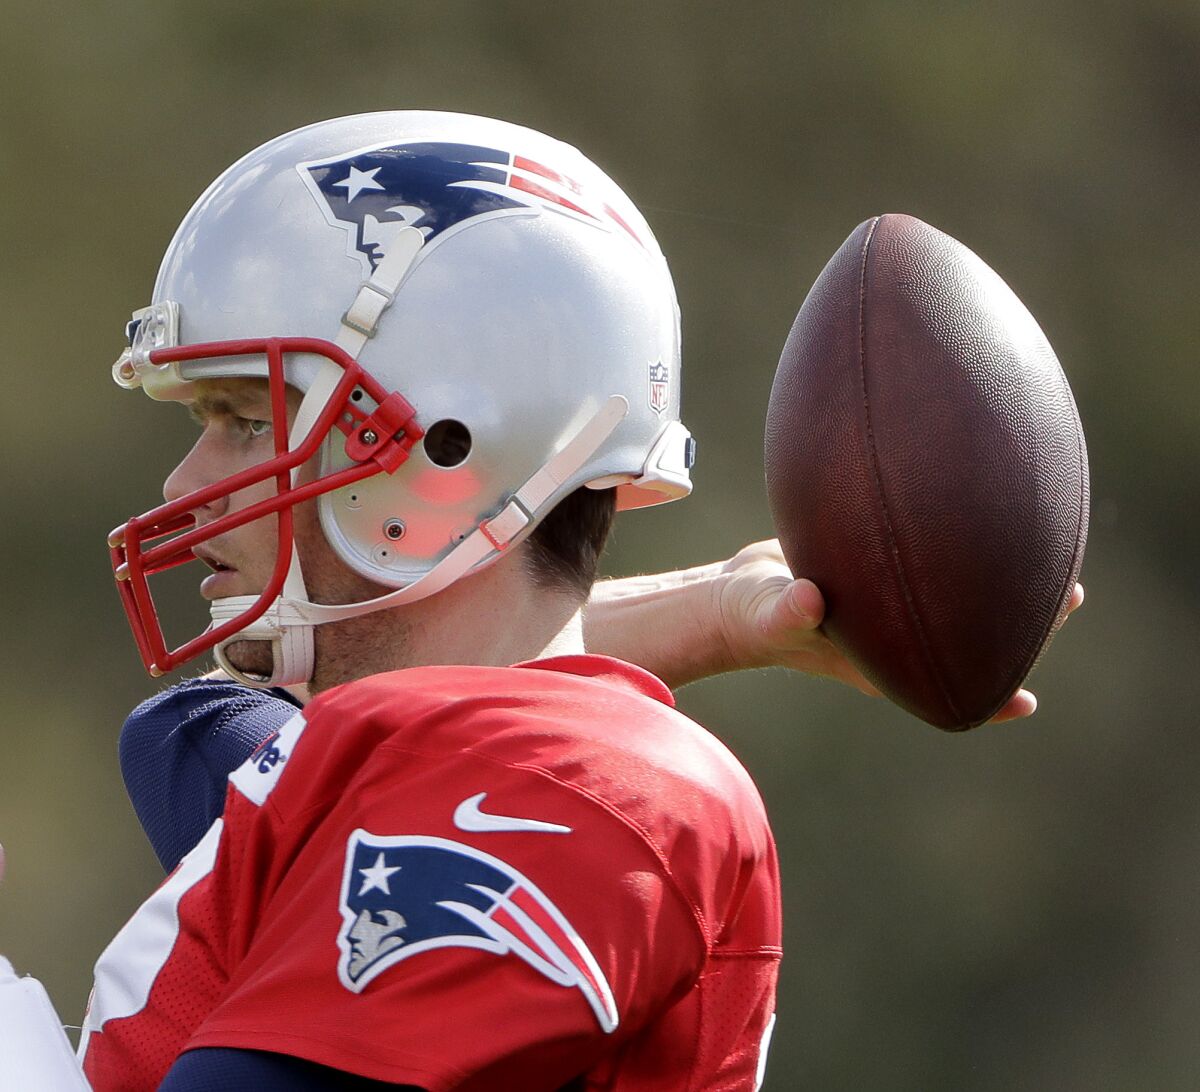 New England Patriots quarterback Tom Brady participates in a drill during practice in Houston on Wednesday for Sunday's NFL Super Bowl against the Atlanta Falcons.